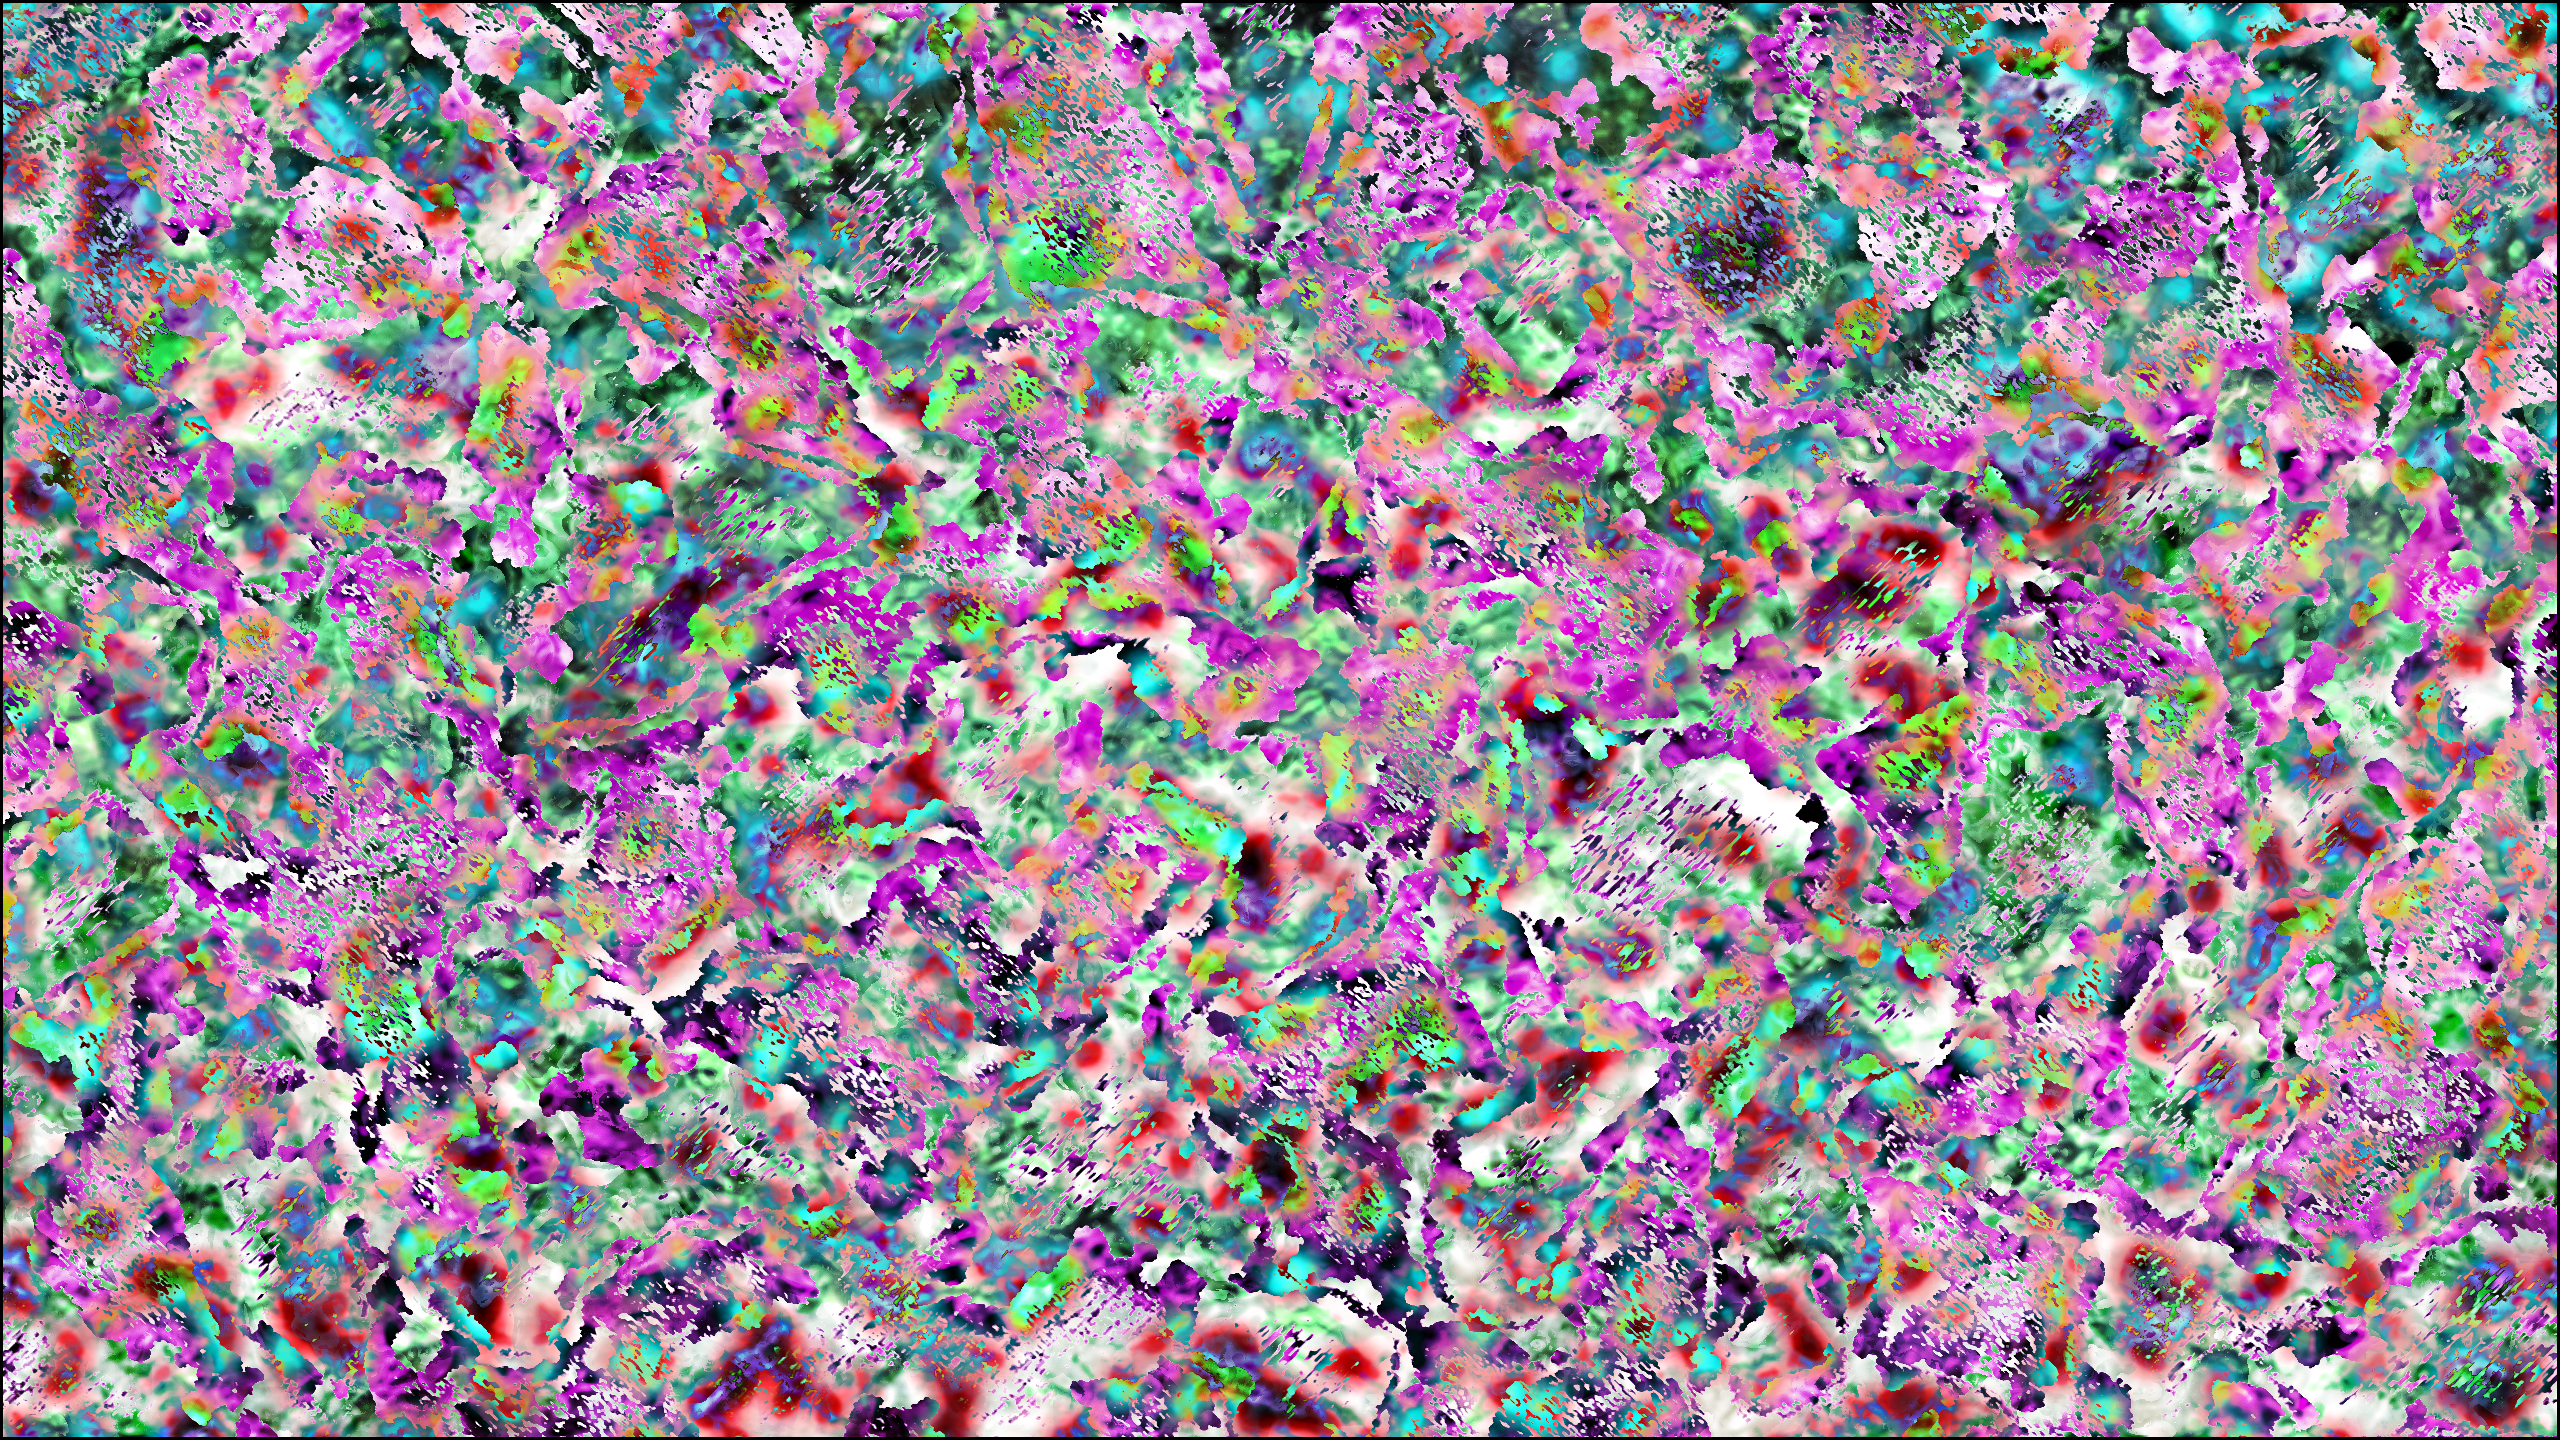 Abstract Digital Art Brightness Trippy Psychedelic 2560x1440